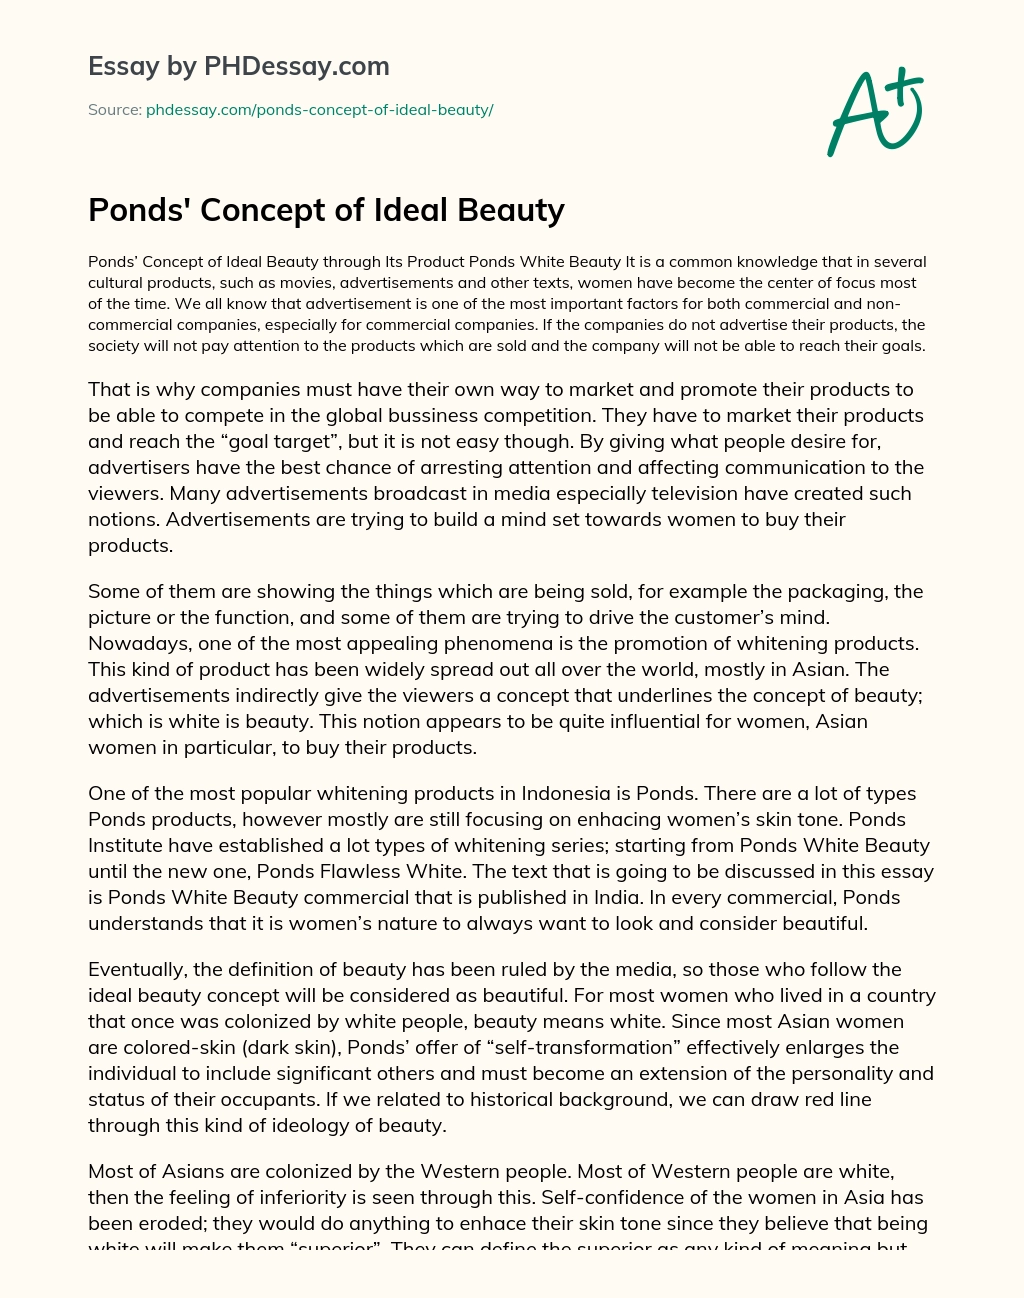 Ponds’ Concept of Ideal Beauty essay